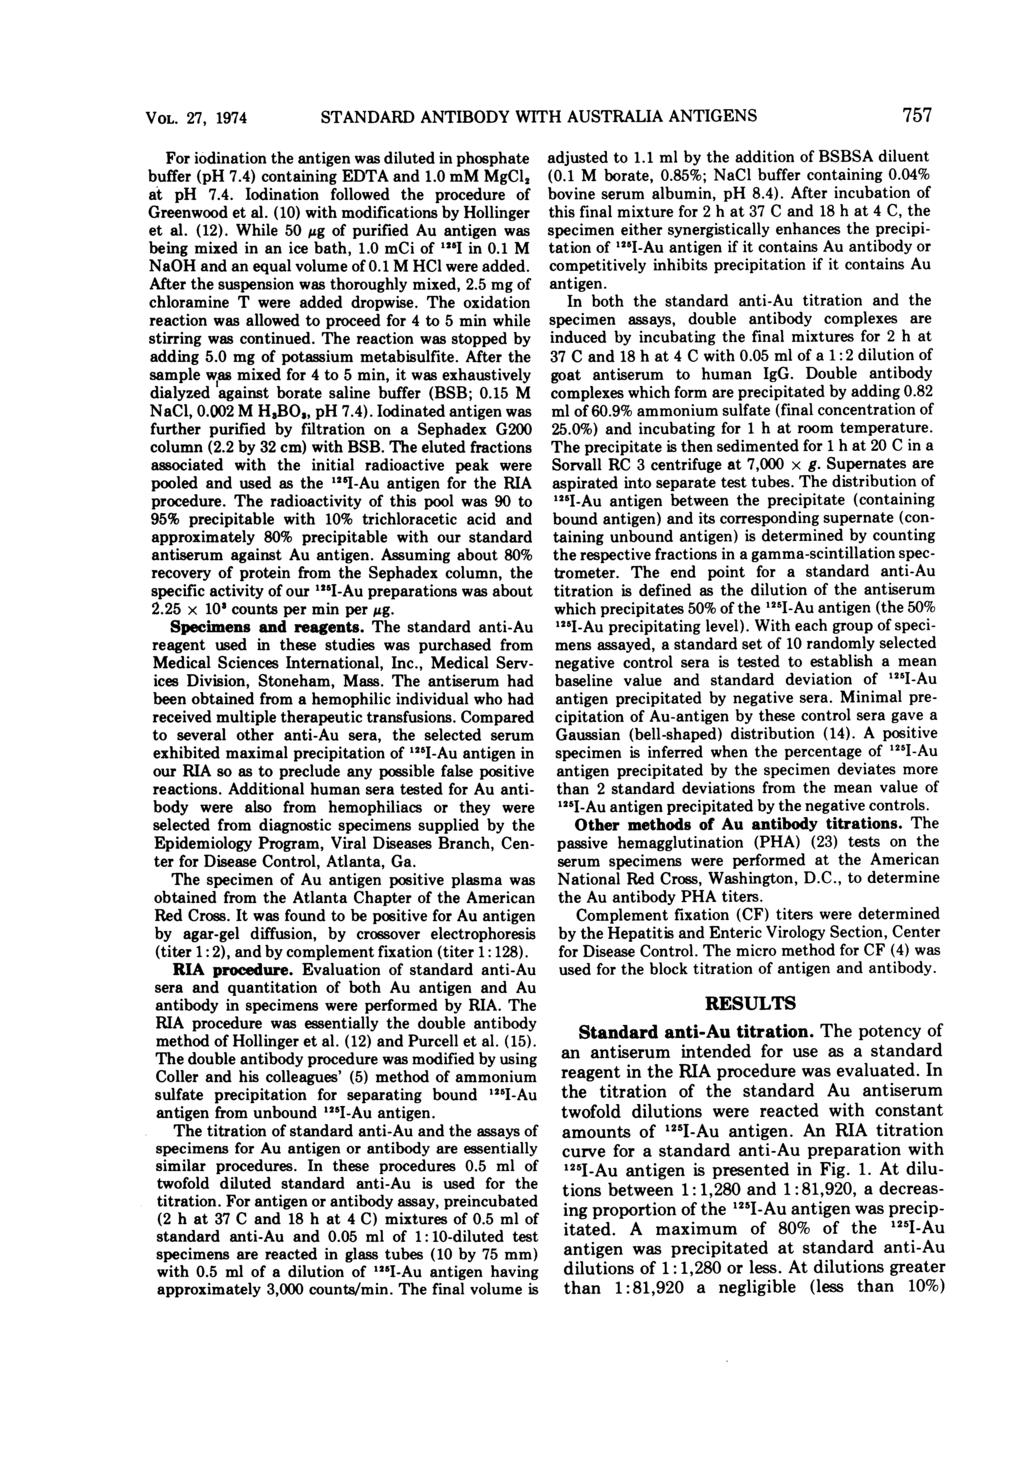 VOL. 27, 1974 STANDARD ANTIBODY WITH AUSTRALIA ANTIGENS For iodination the antigen was diluted in phosphate buffer (ph 7.4) containing EDTA and 1.0 mm MgCl, at ph 7.4. Iodination followed the procedure of Greenwood et al.